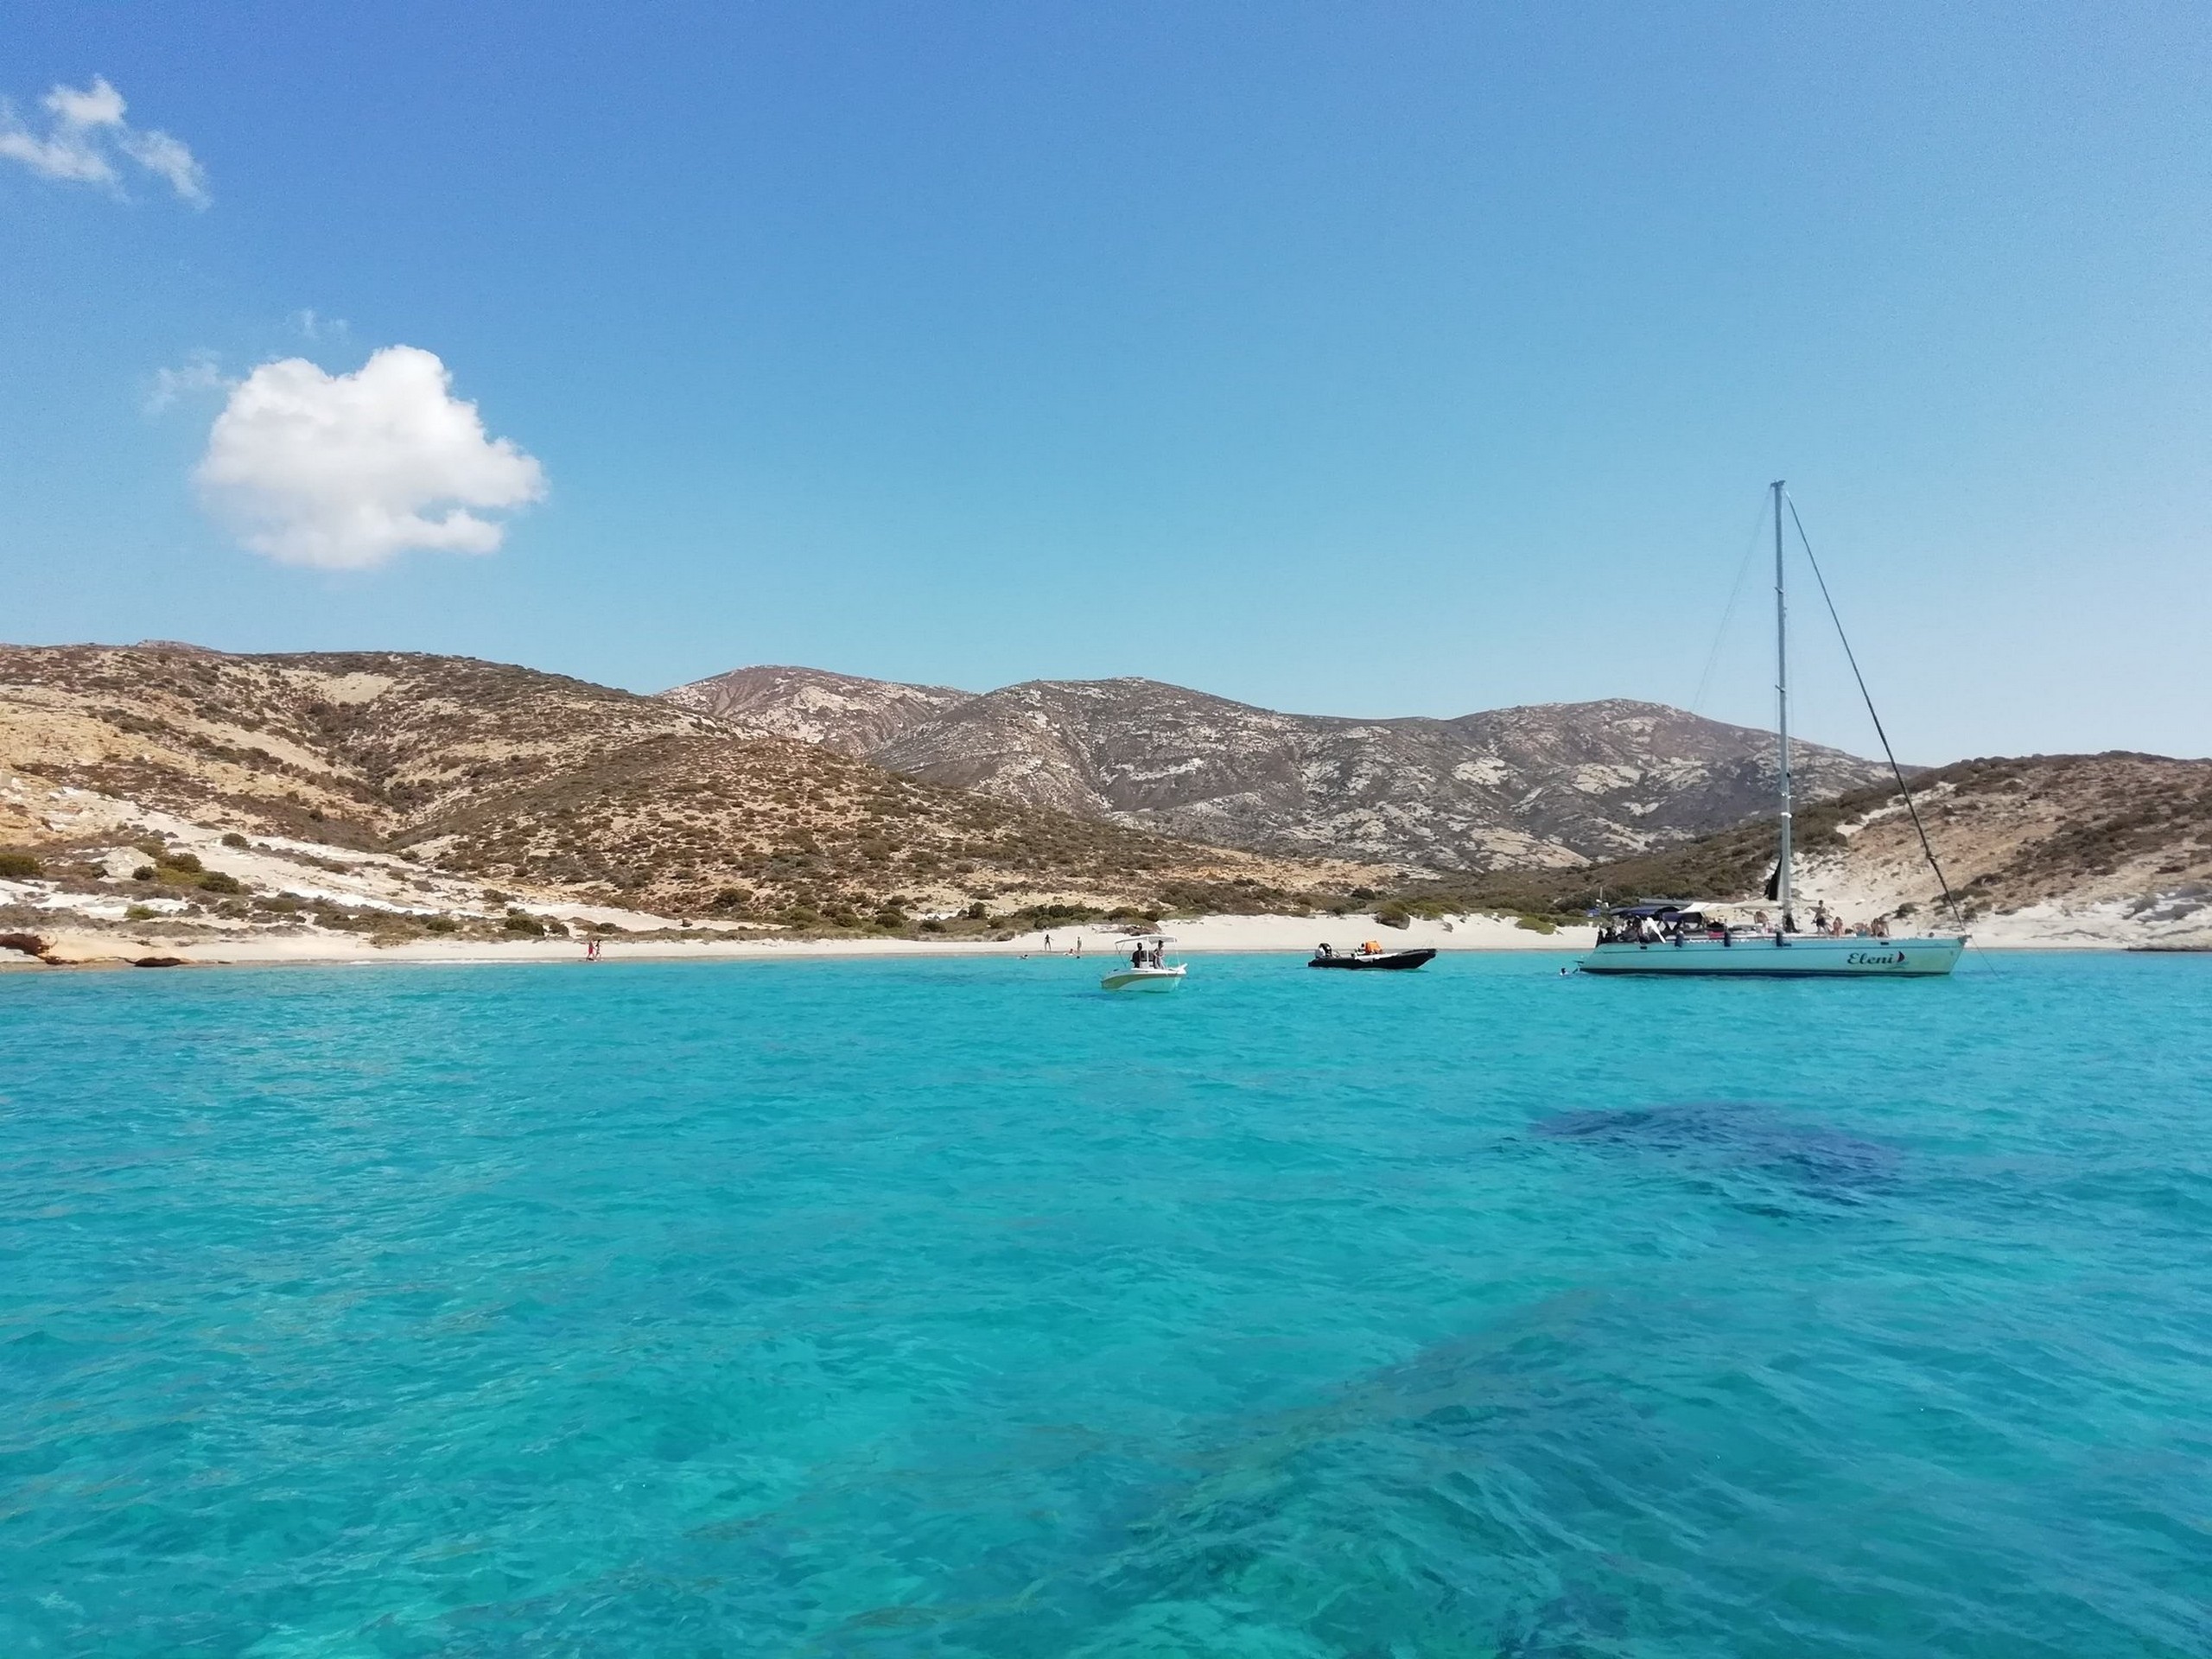 Sailing near the shores of one of the Cyclades Islands